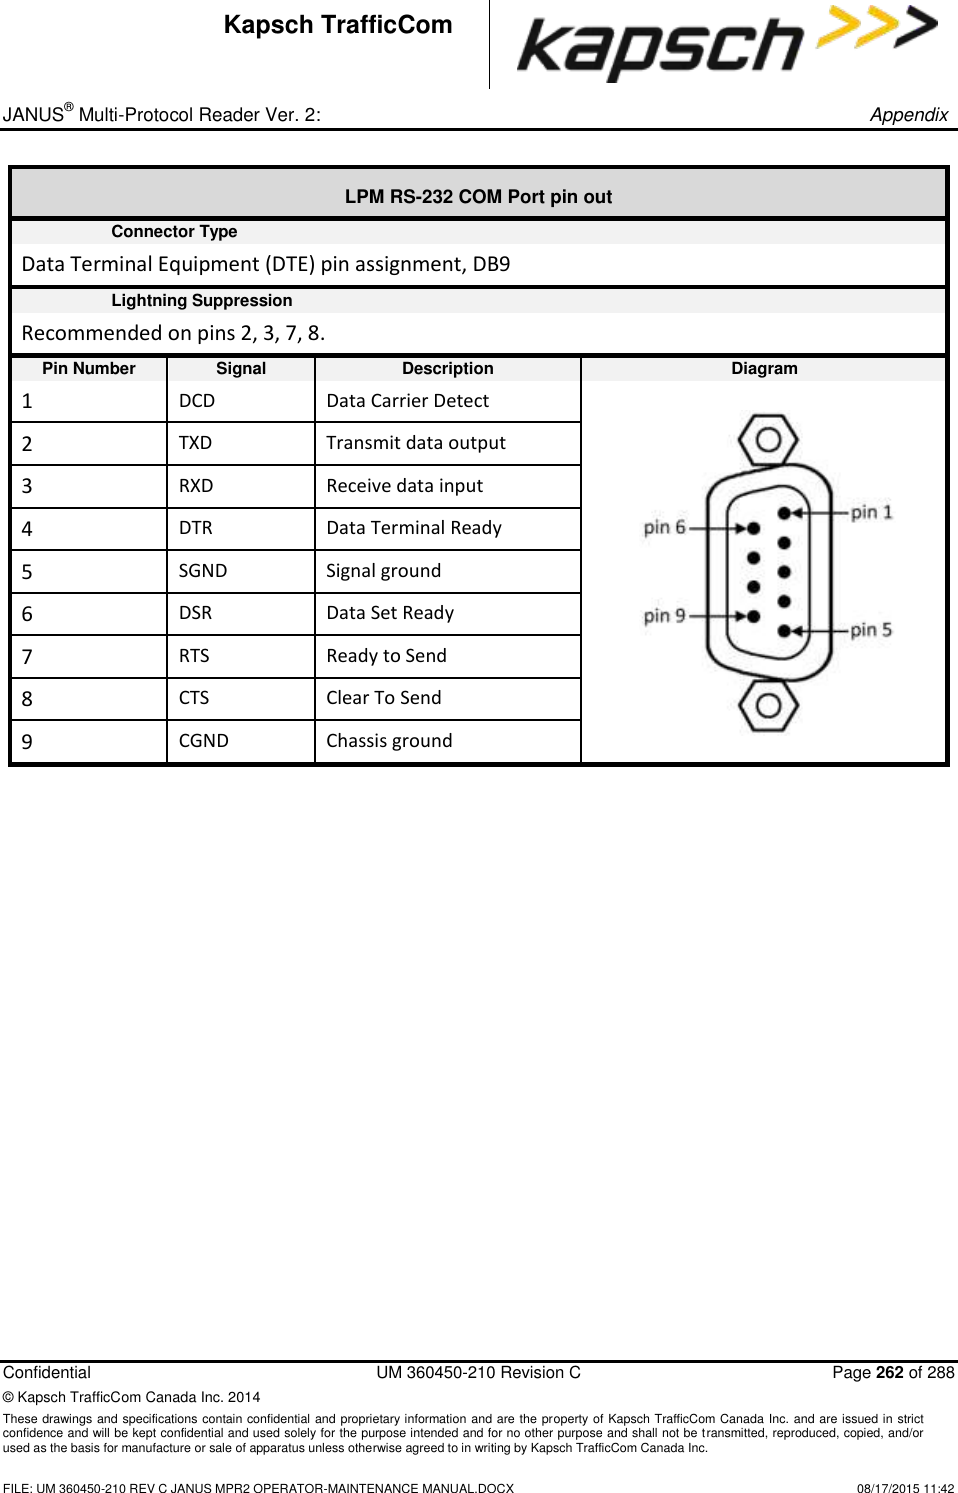 _ JANUS® Multi-Protocol Reader Ver. 2:       Appendix   Confidential  UM 360450-210 Revision C  Page 262 of 288 © Kapsch TrafficCom Canada Inc. 2014 These drawings and specifications contain confidential and proprietary information and are the property of Kapsch TrafficCom Canada Inc. and are issued in strict confidence and will be kept confidential and used solely for the purpose intended and for no other purpose and shall not be transmitted, reproduced, copied, and/or used as the basis for manufacture or sale of apparatus unless otherwise agreed to in writing by Kapsch TrafficCom Canada Inc.    FILE: UM 360450-210 REV C JANUS MPR2 OPERATOR-MAINTENANCE MANUAL.DOCX   08/17/2015 11:42 Kapsch TrafficCom LPM RS-232 COM Port pin out Connector Type Data Terminal Equipment (DTE) pin assignment, DB9  Lightning Suppression Recommended on pins 2, 3, 7, 8. Pin Number Signal Description Diagram 1 DCD Data Carrier Detect  2 TXD Transmit data output 3 RXD Receive data input 4 DTR Data Terminal Ready 5 SGND Signal ground 6 DSR Data Set Ready 7 RTS Ready to Send 8 CTS Clear To Send 9 CGND Chassis ground  